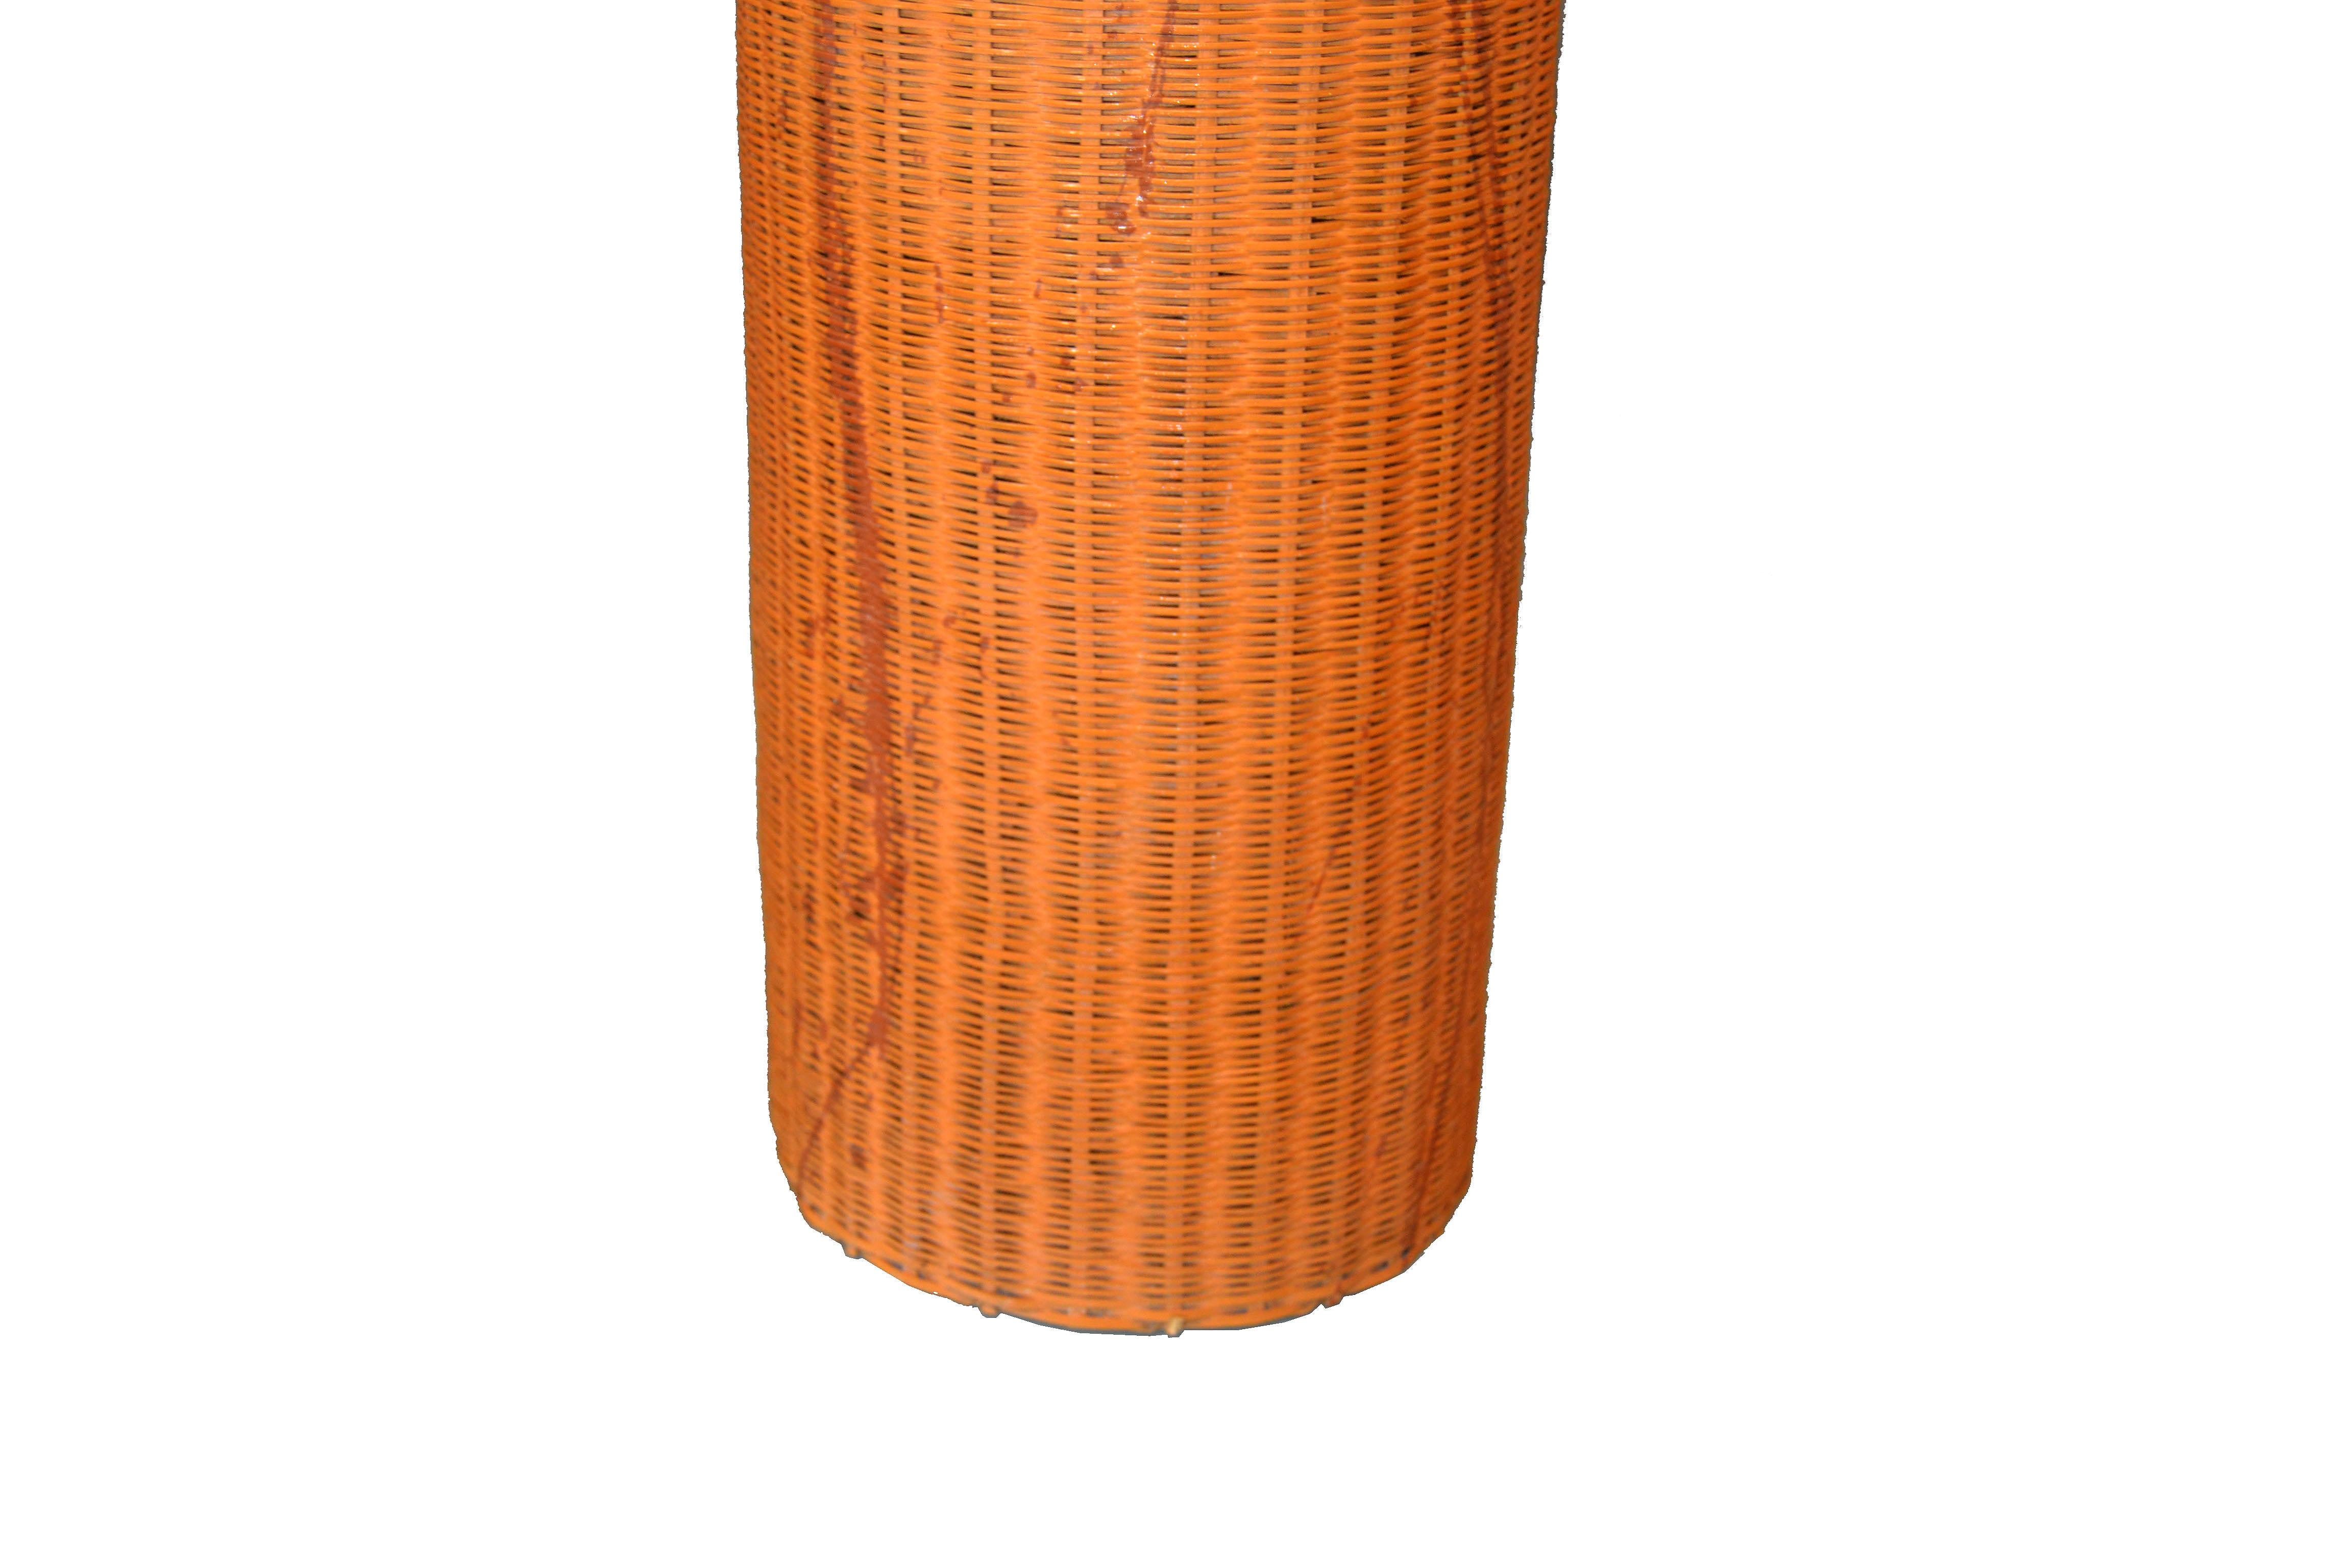 Mid-20th Century Huge Boho Chic Mid-Century Modern Handwoven Wicker Rattan Cone Shade For Sale